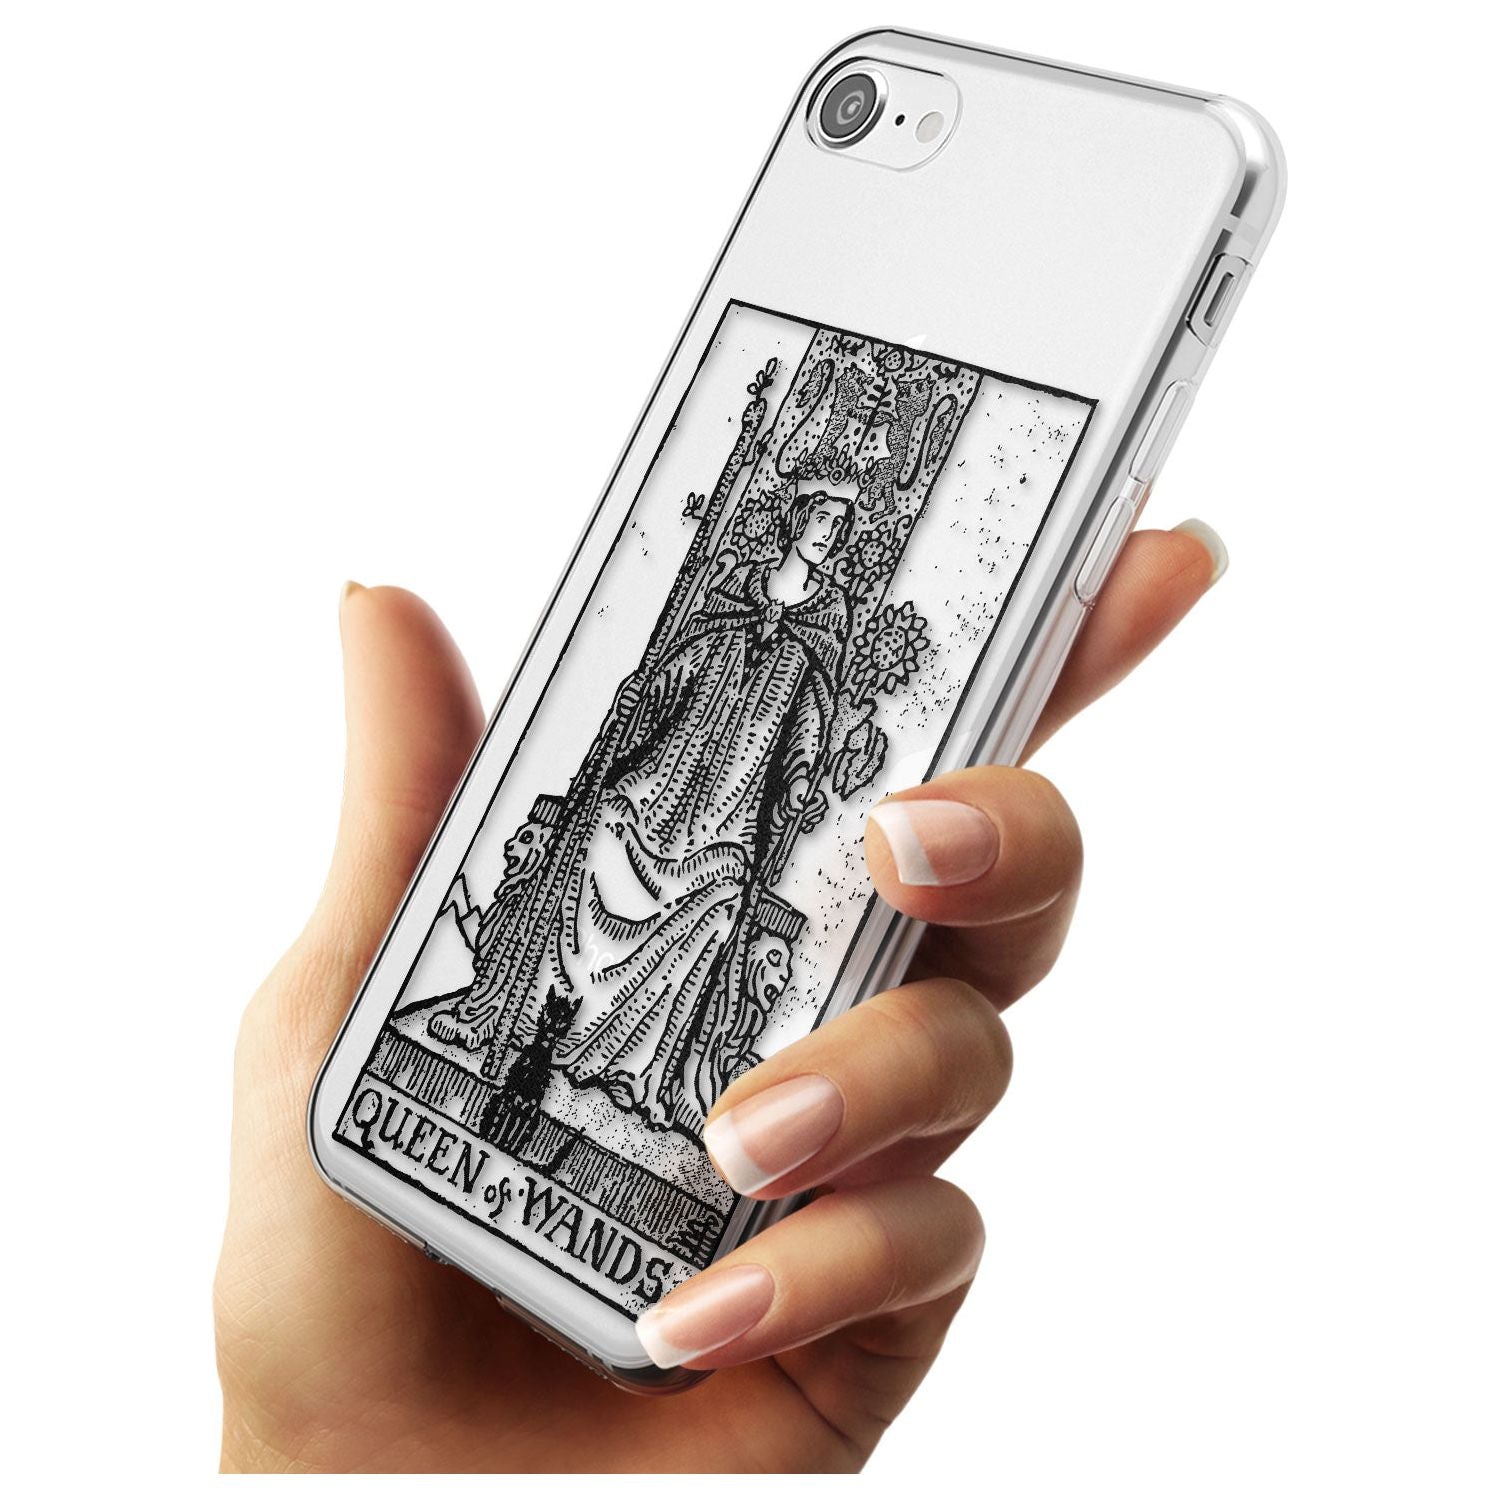 Queen of Wands Tarot Card - Transparent Black Impact Phone Case for iPhone SE 8 7 Plus